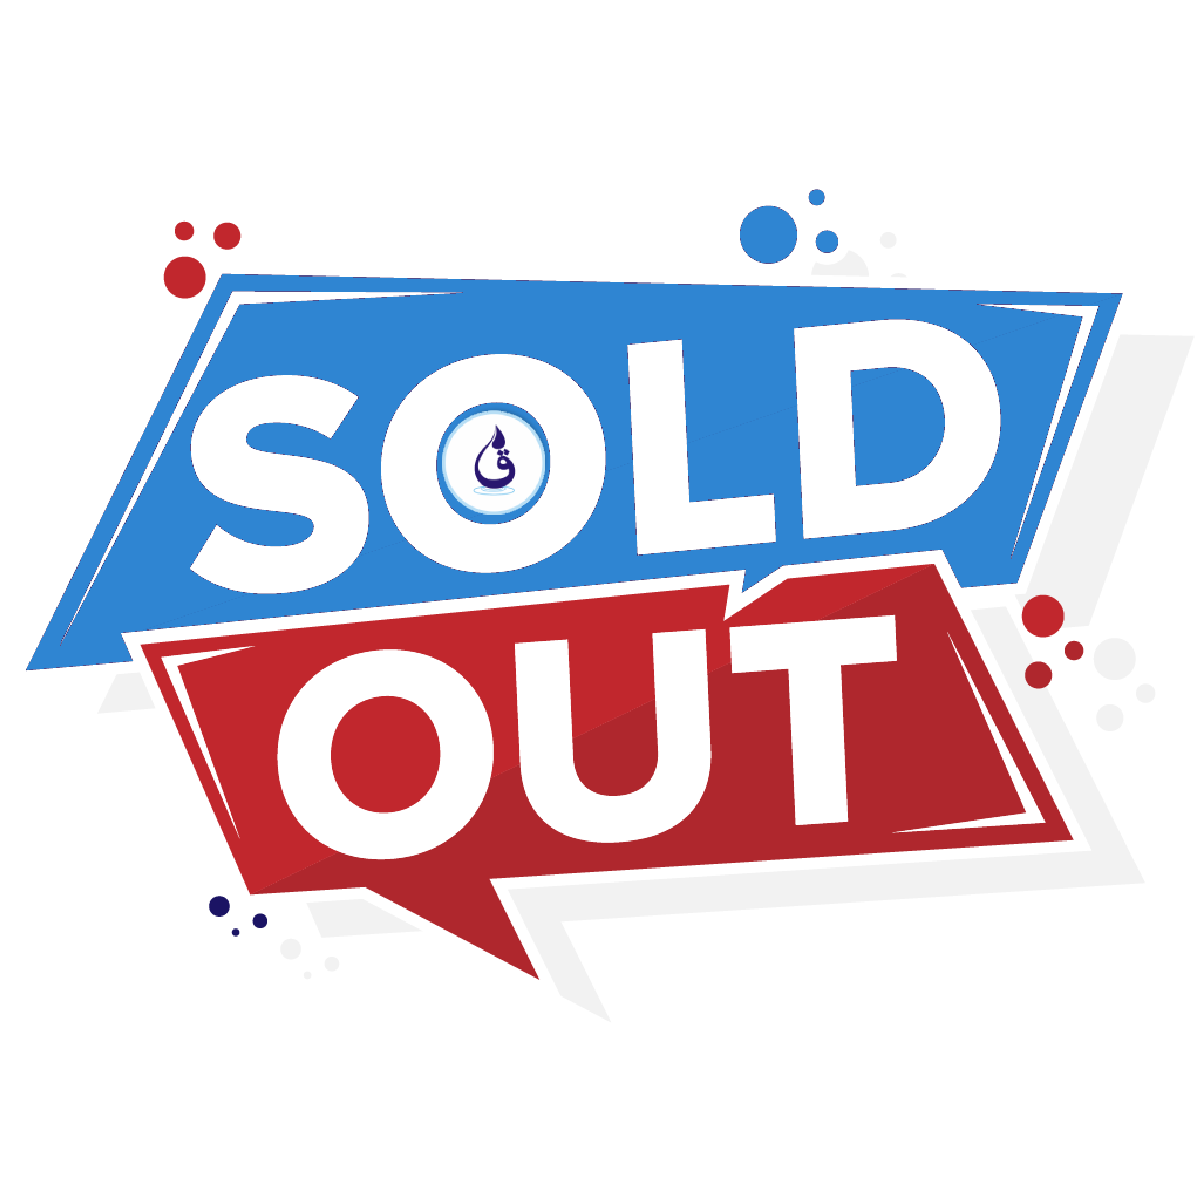 Sold Out Image 1.1